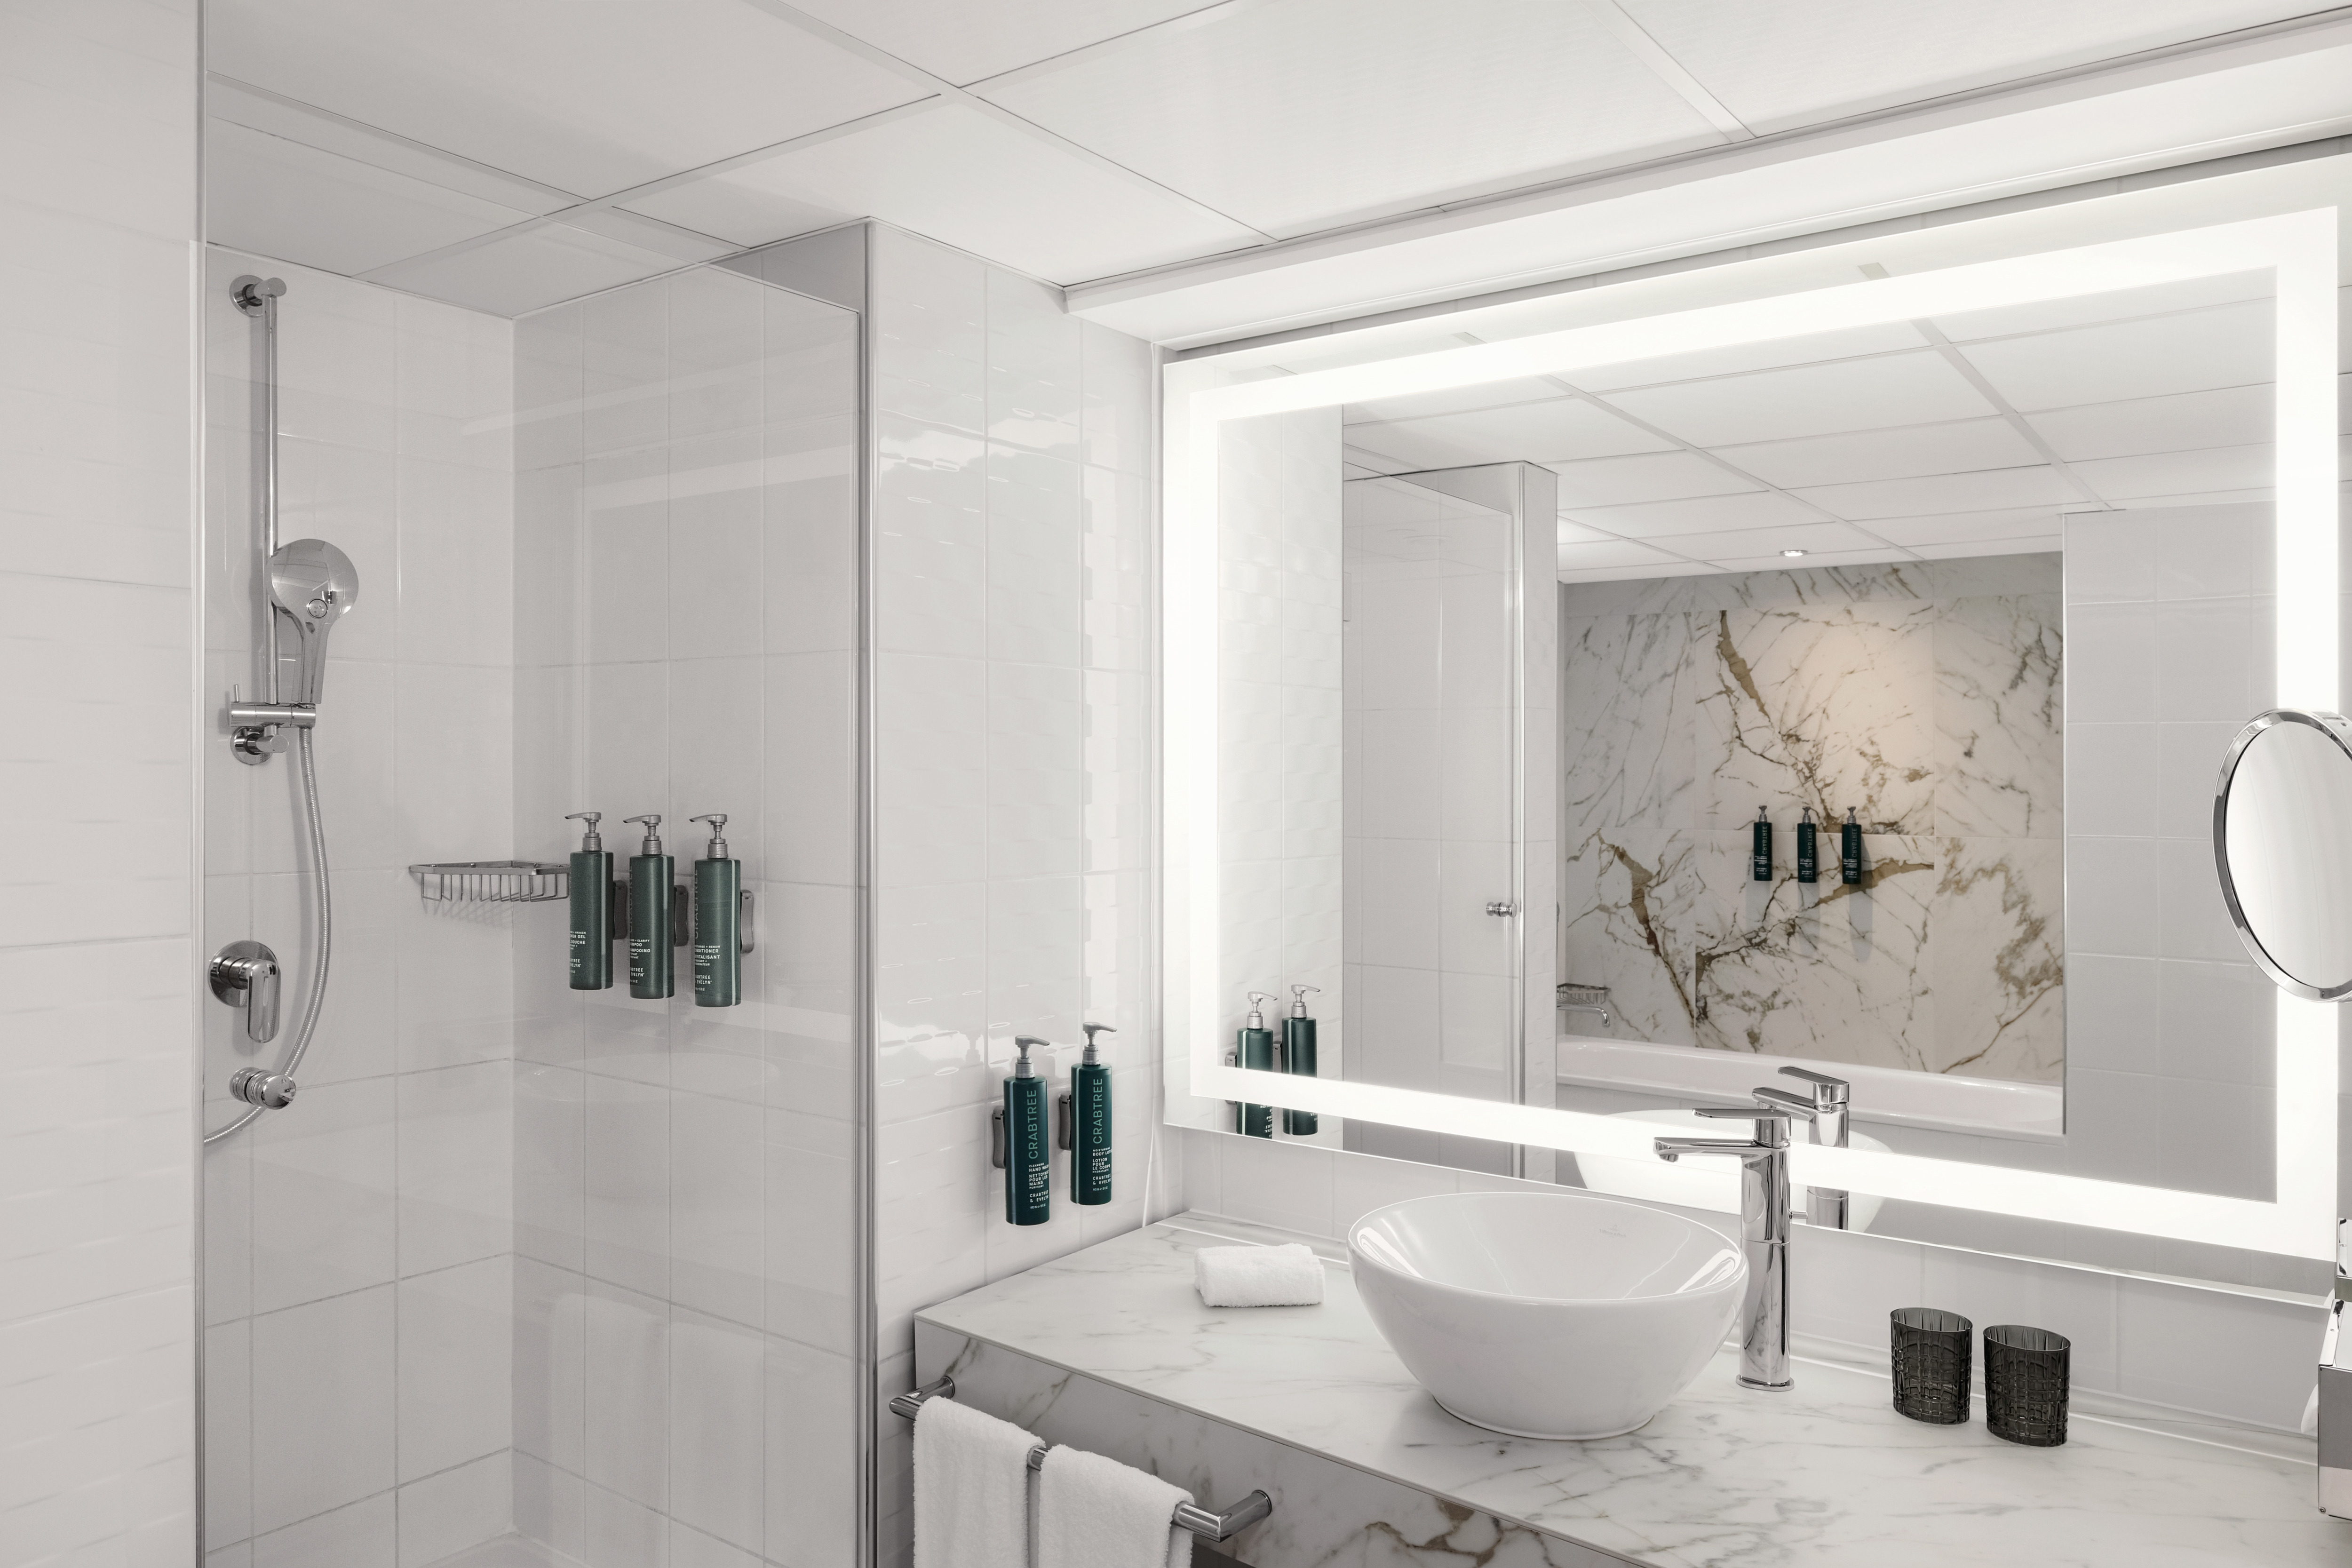 Vanity Area and Shower with Amenities in a Hotel Suite